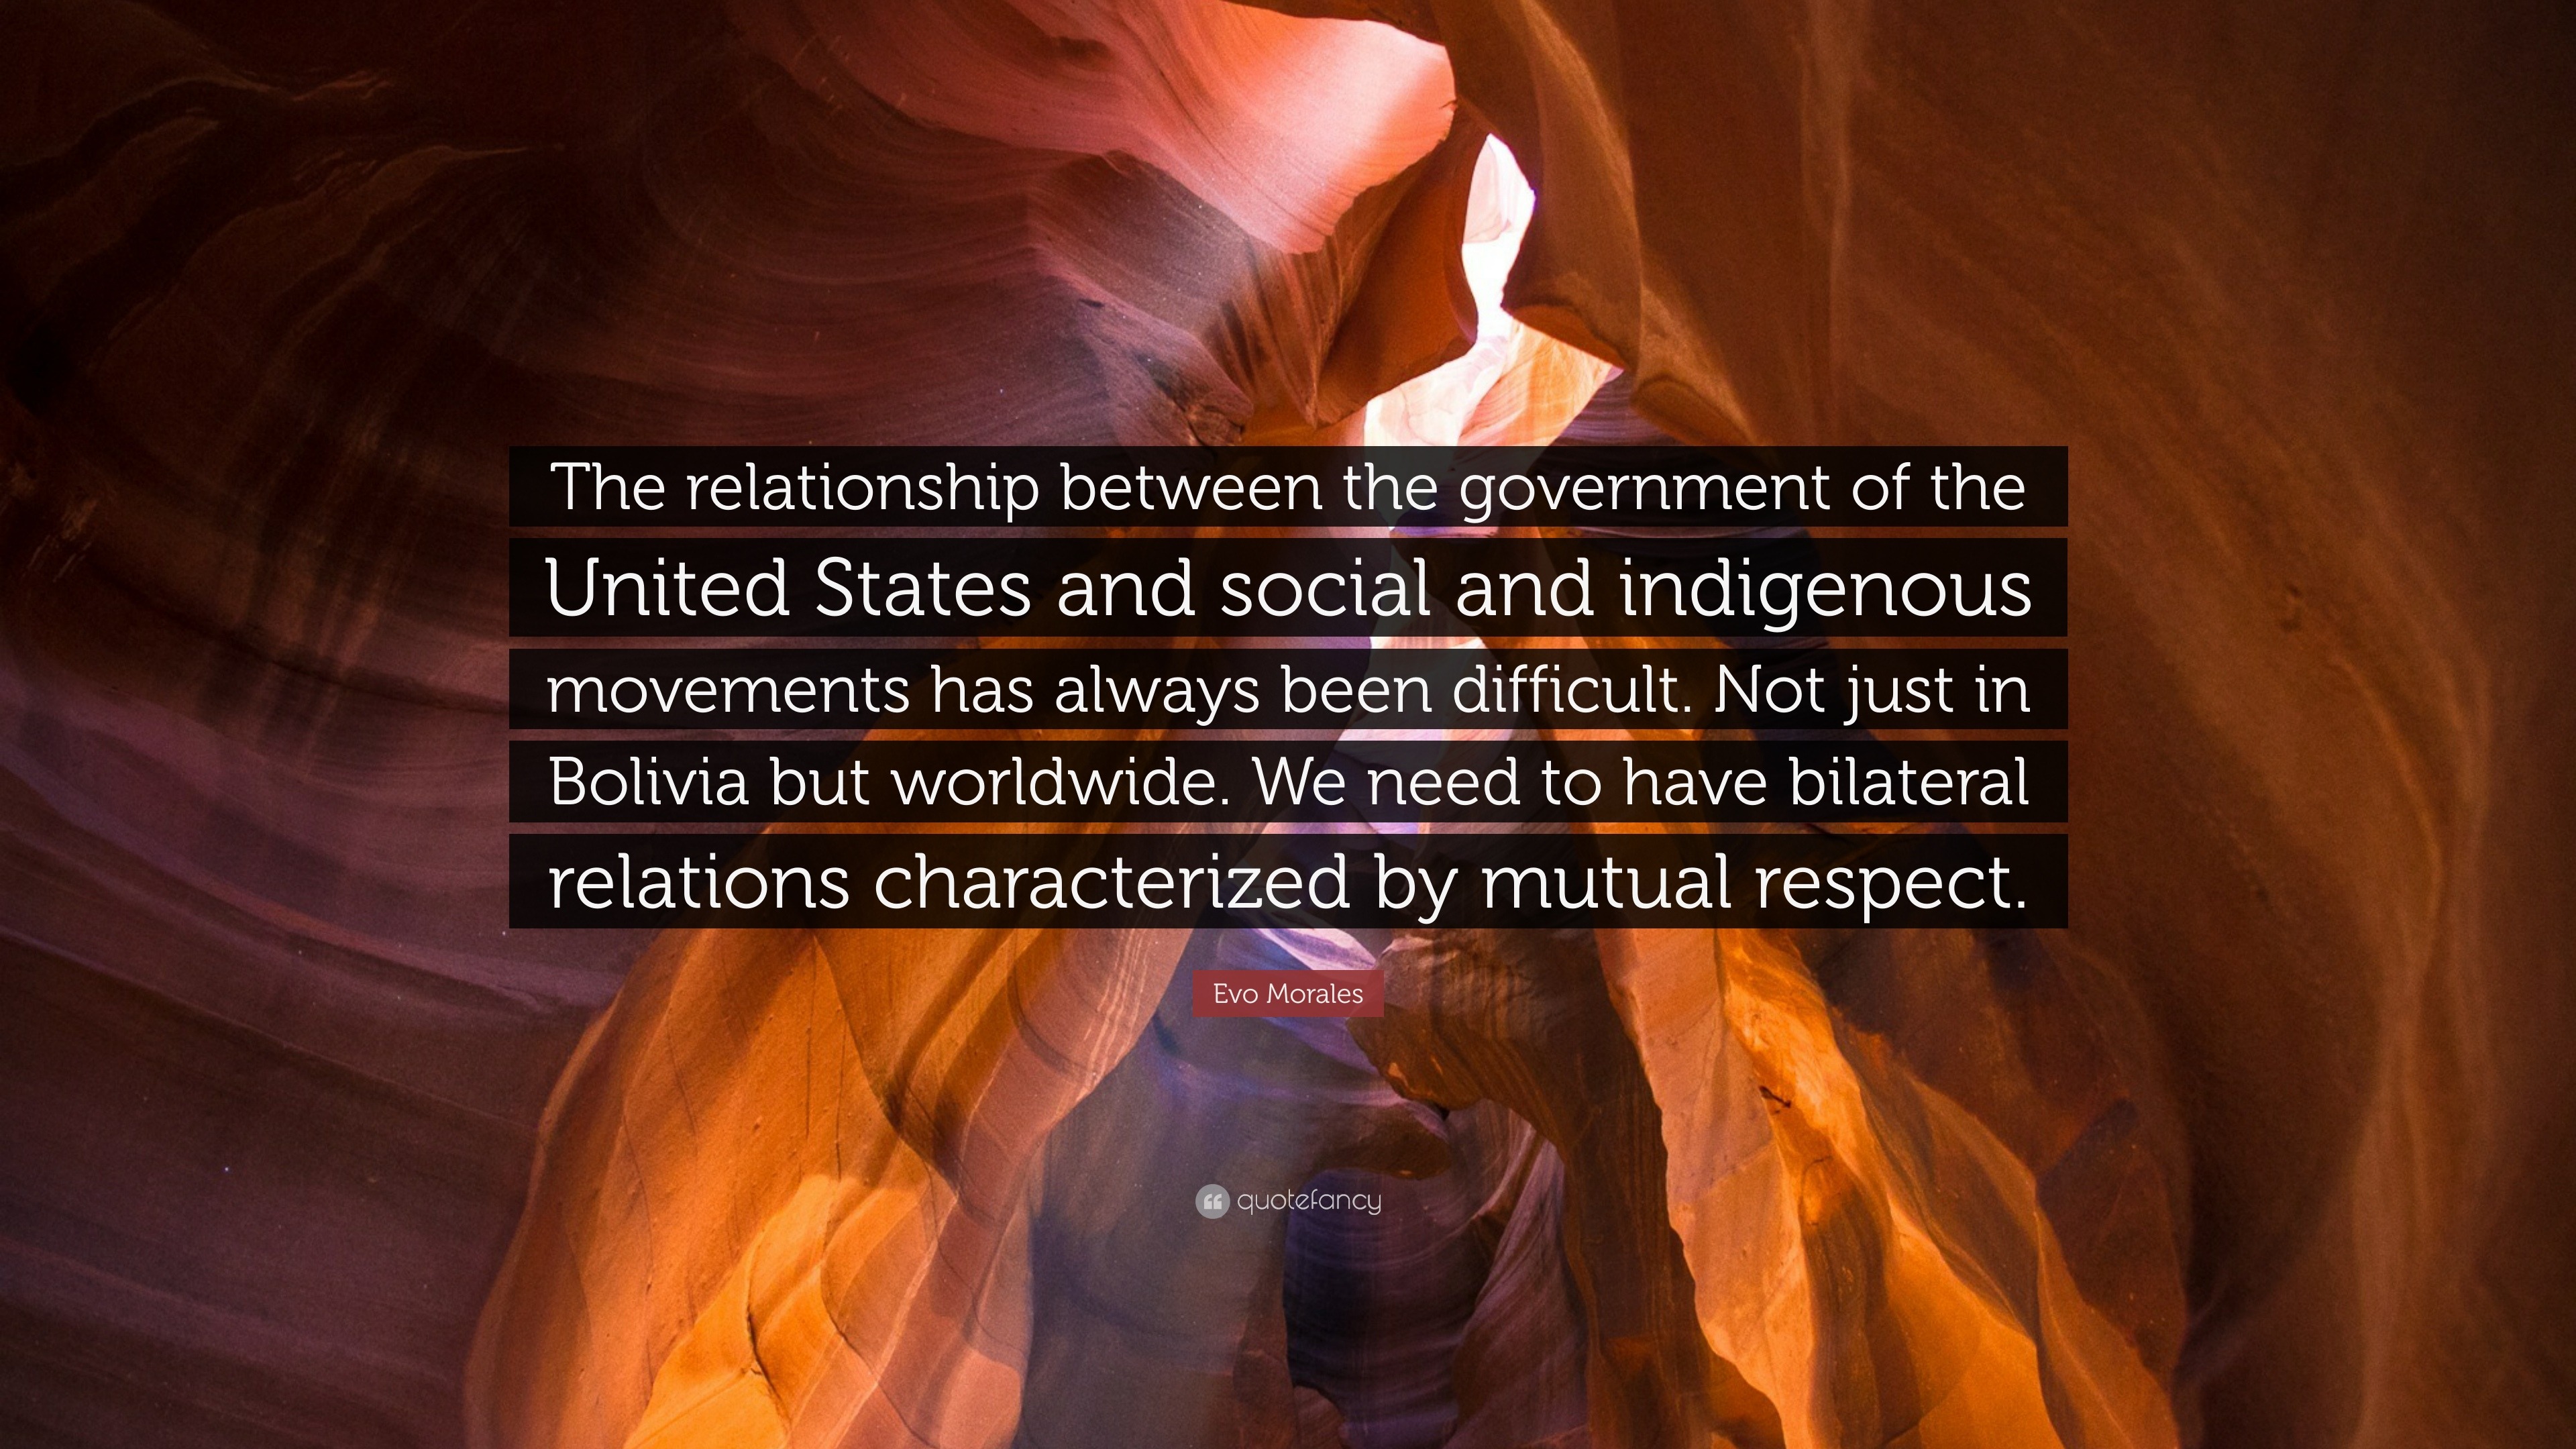 Evo Morales Quote The Relationship Between The Government Of The United States And Social And Indigenous Movements Has Always Been Difficu 9 Wallpapers Quotefancy